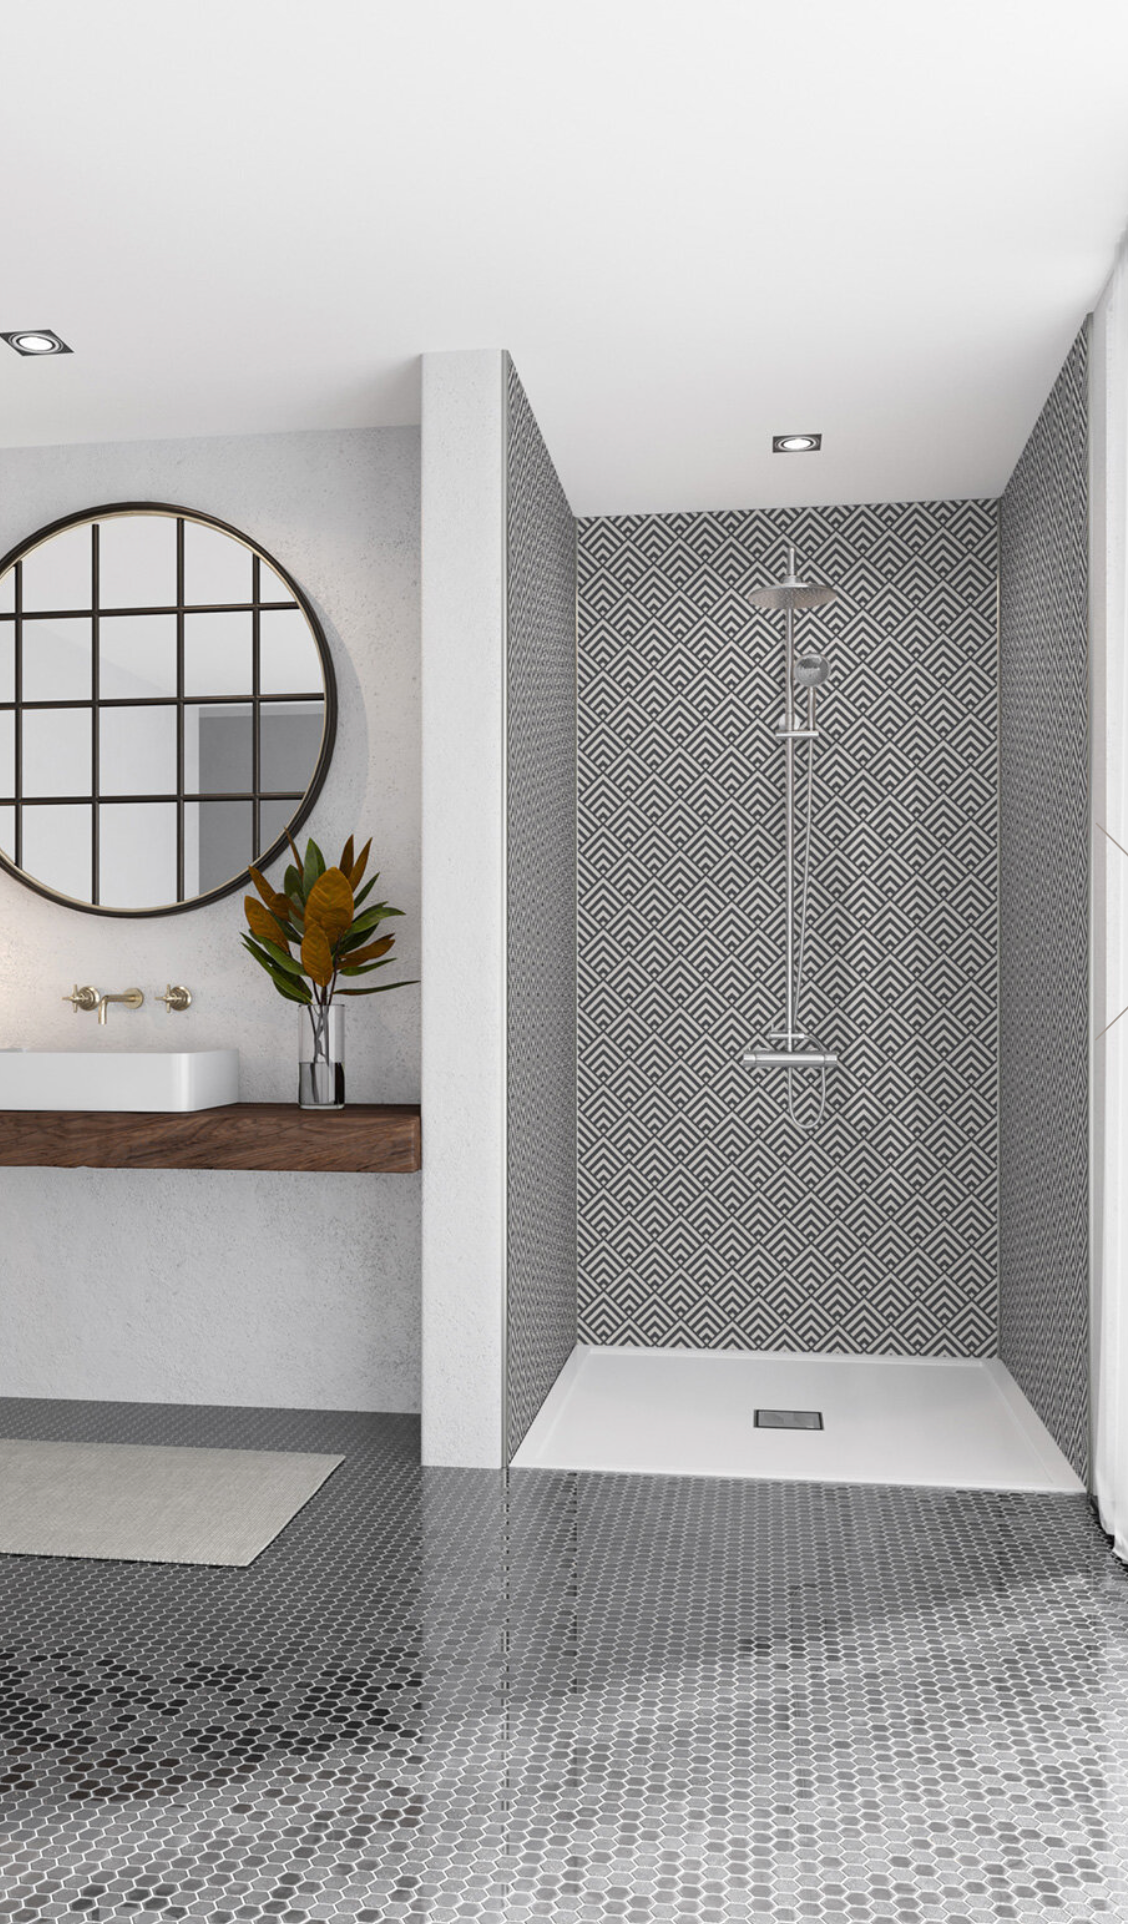 Wetwall Acrylic Patterns Shower Panels - Tiles/Pyramid